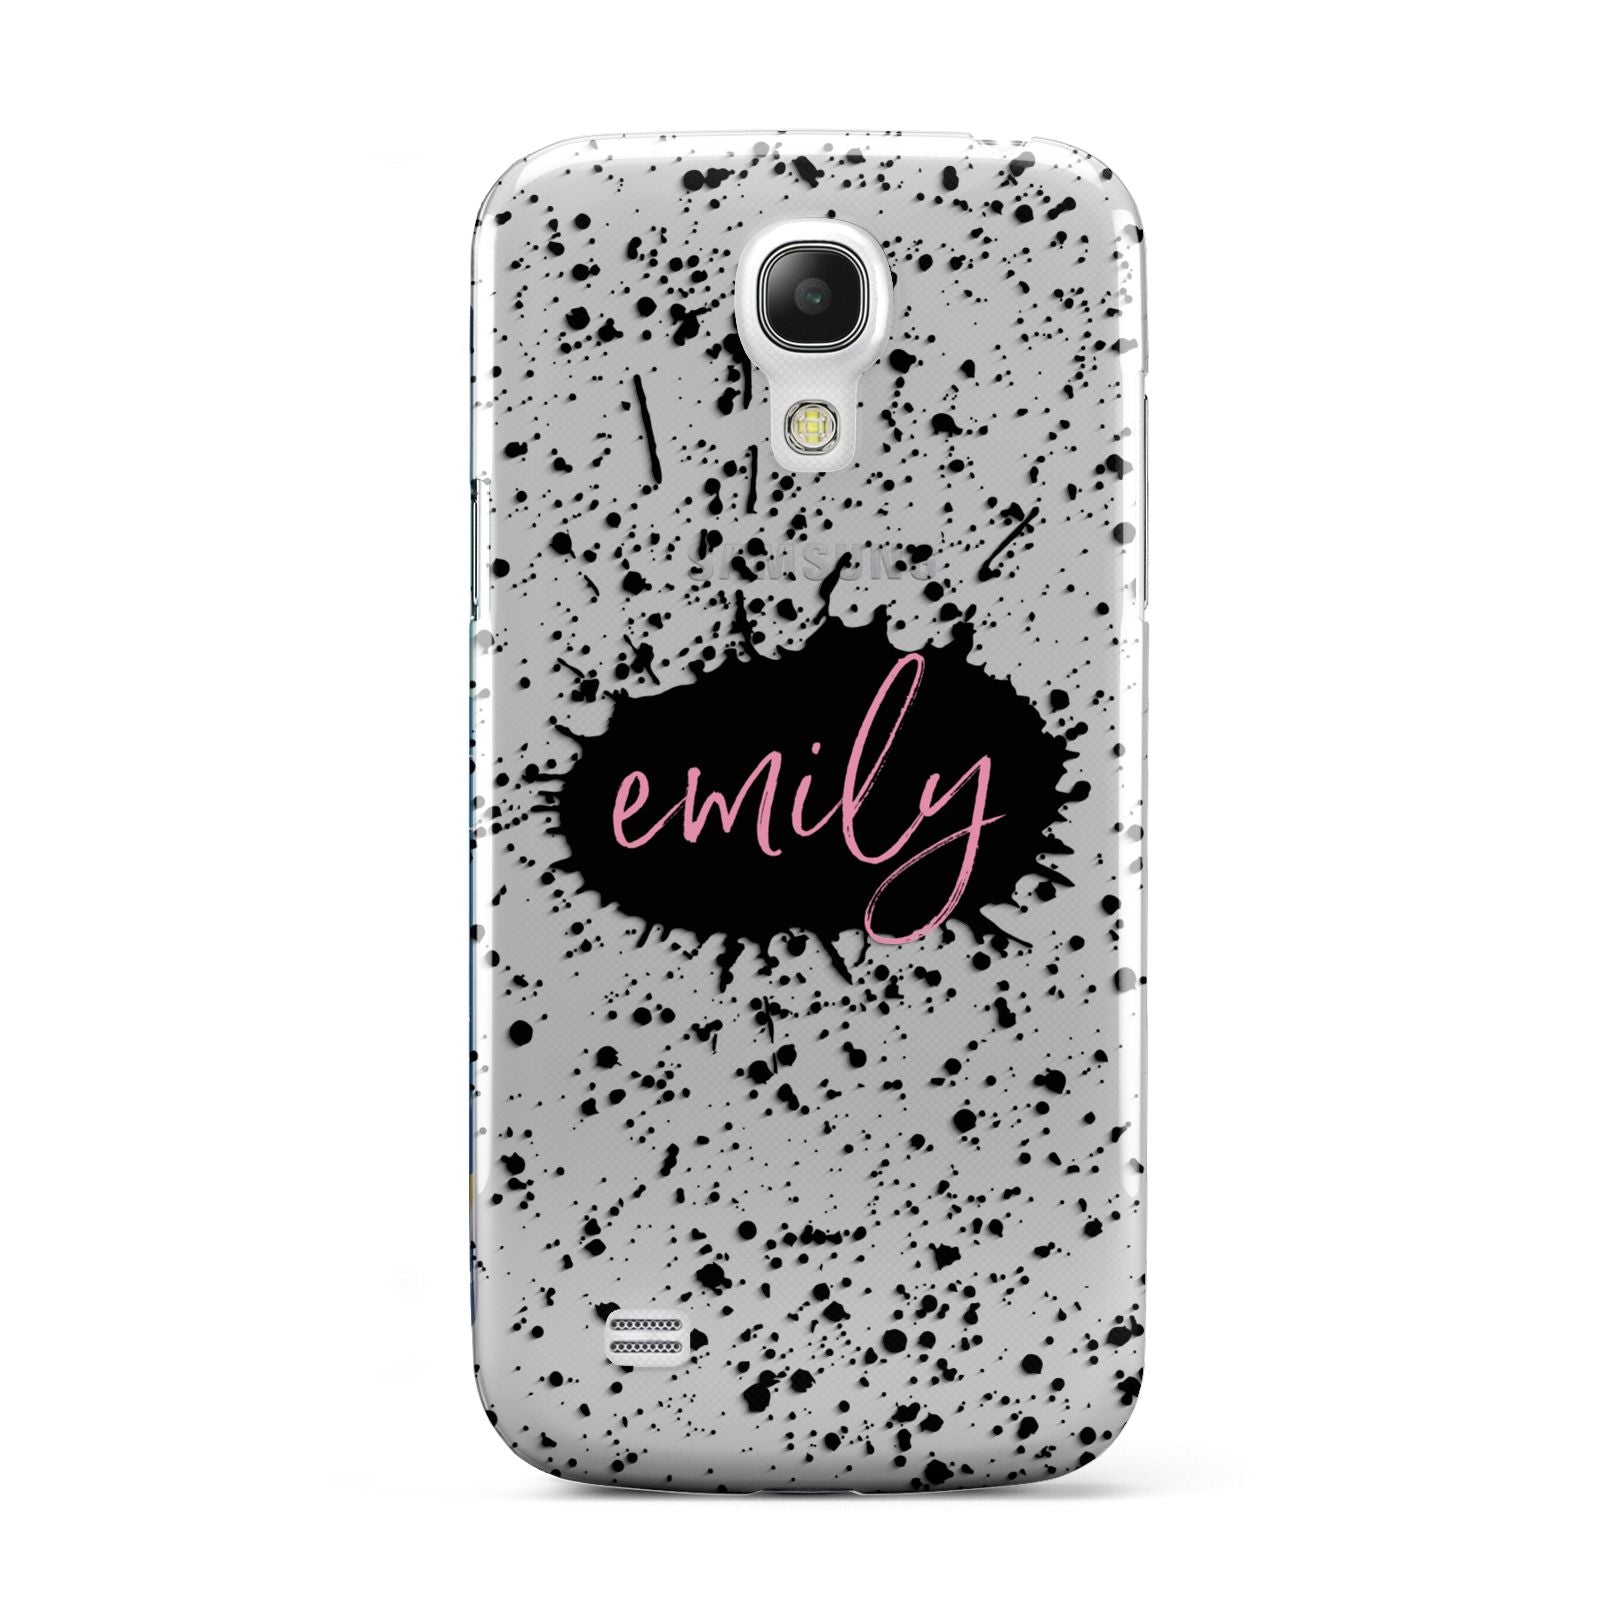 Personalised Black Ink Splat Clear Name Samsung Galaxy S4 Mini Case